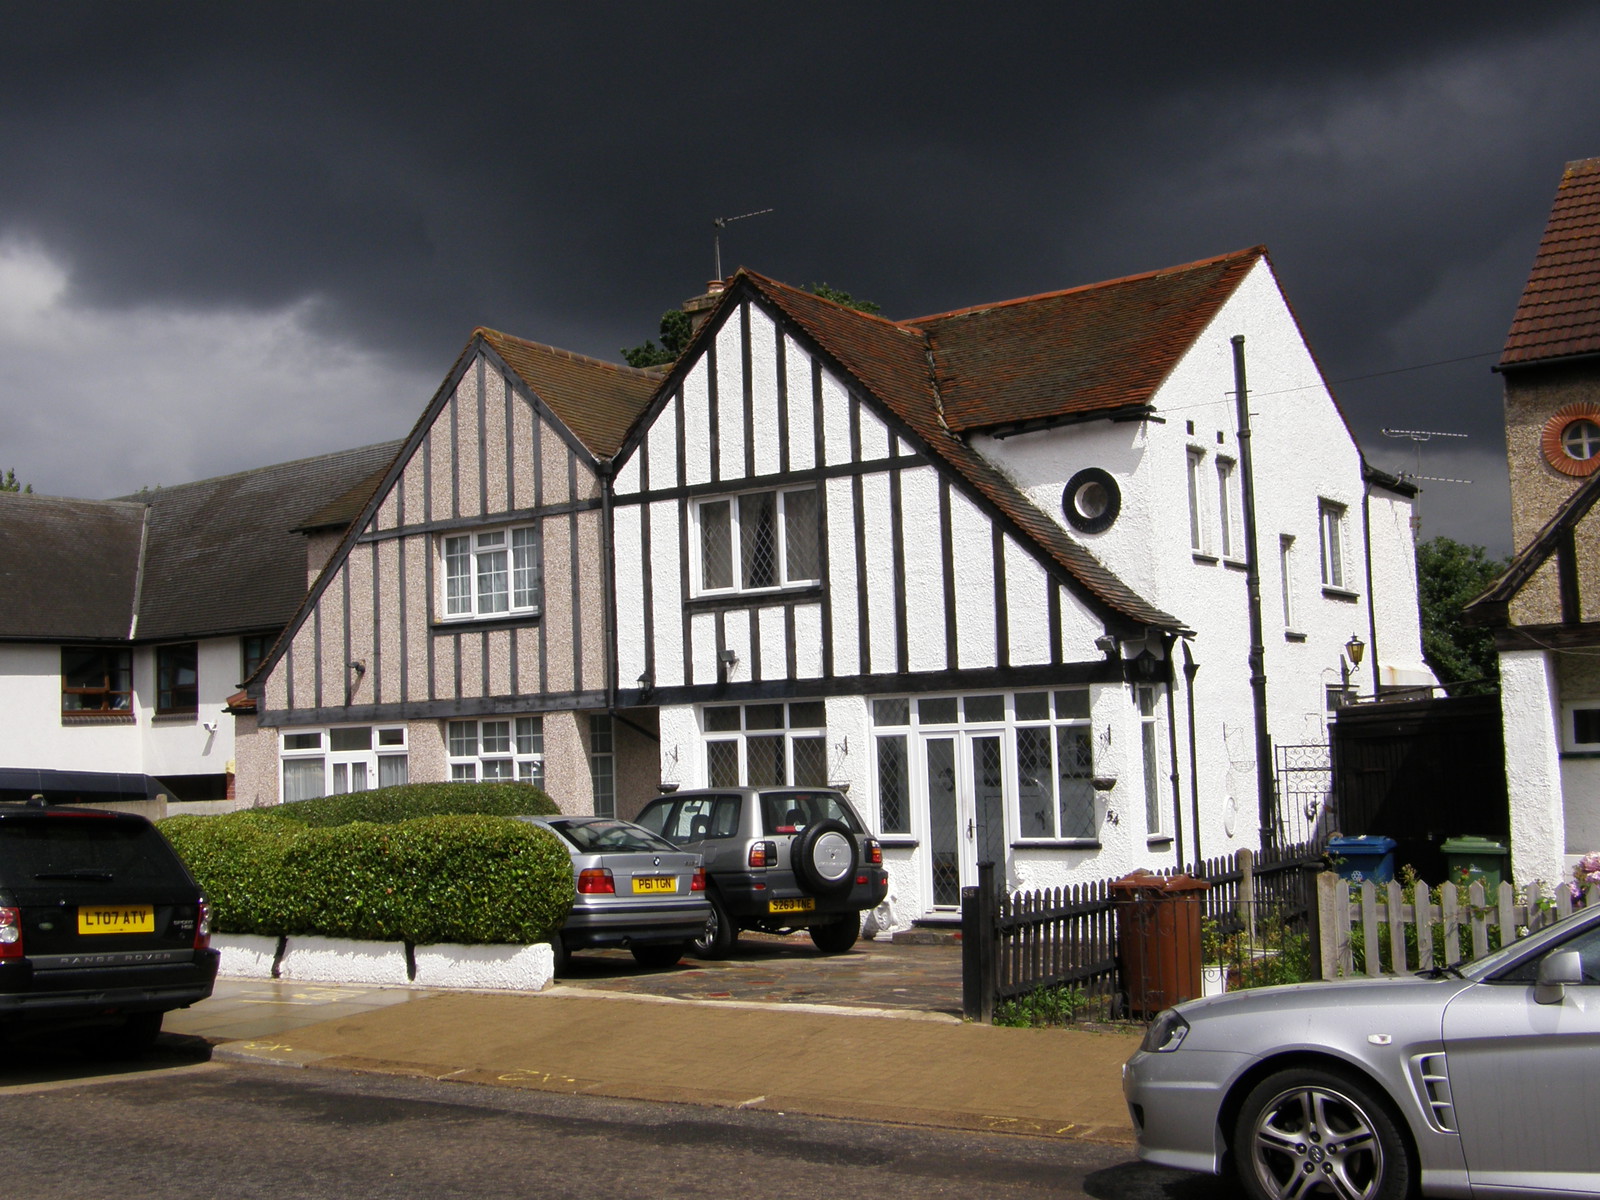 Storm clouds and Mock Tudor houses